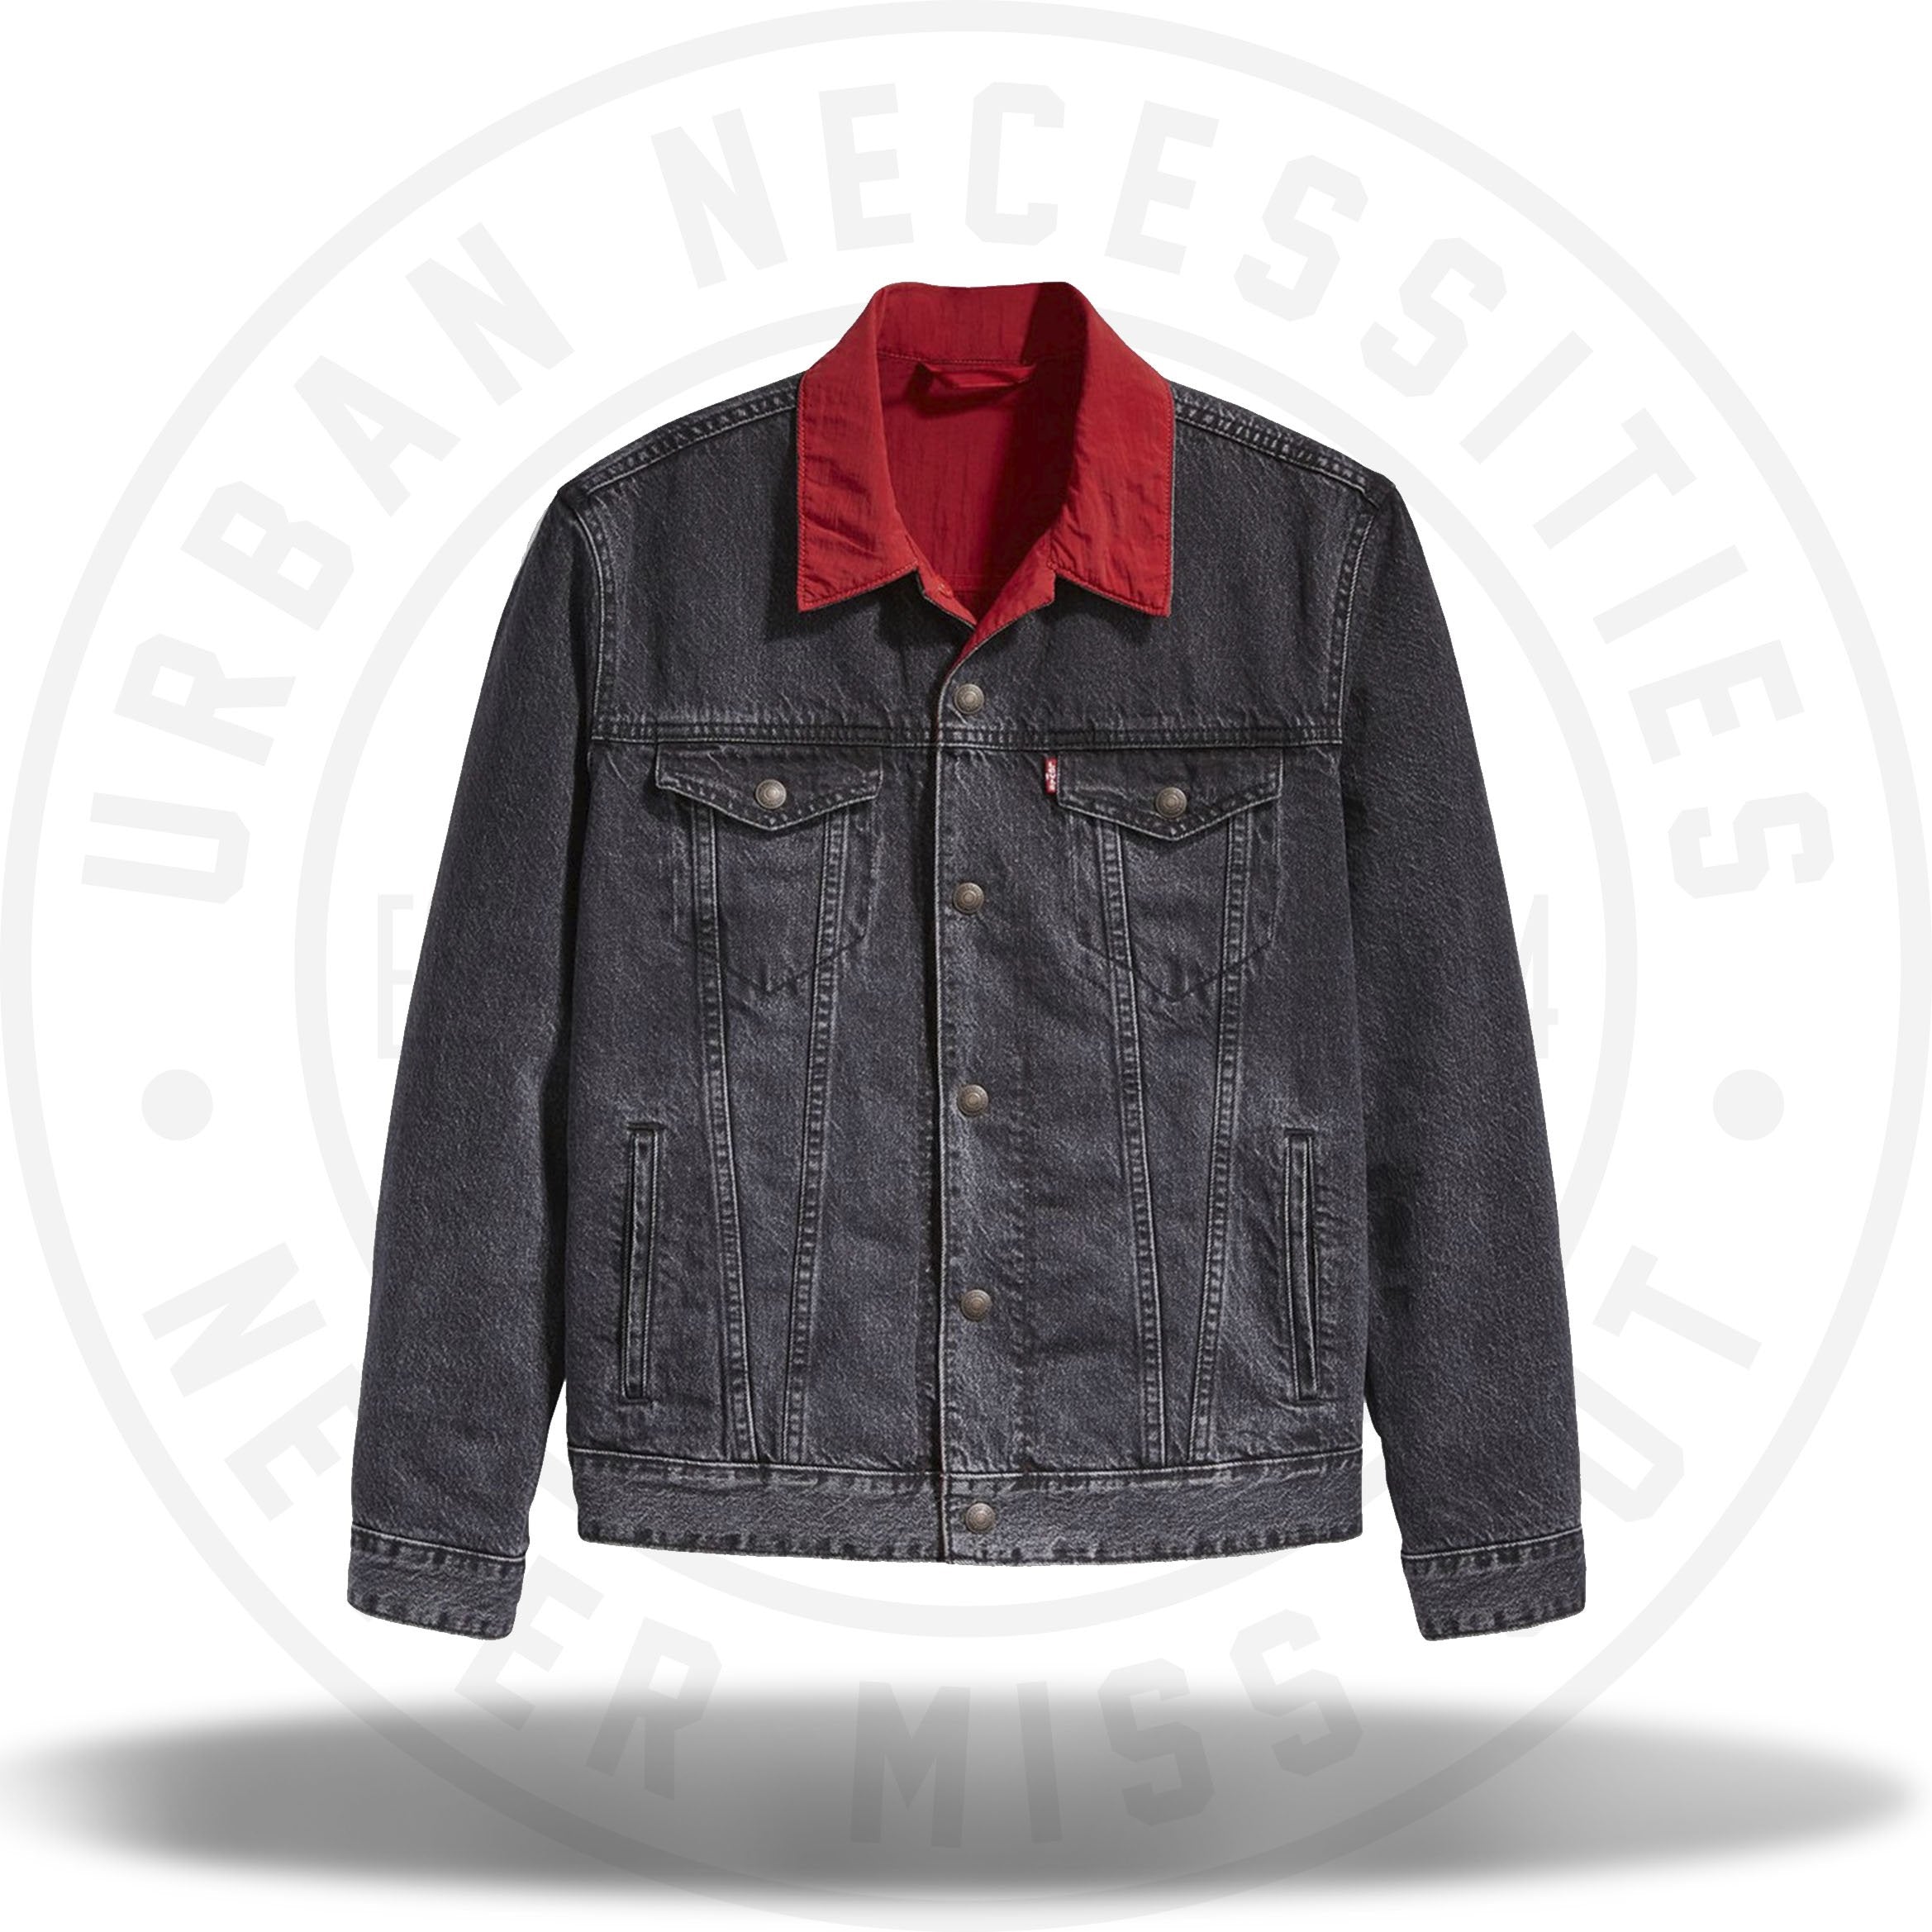 levi's red and black jacket